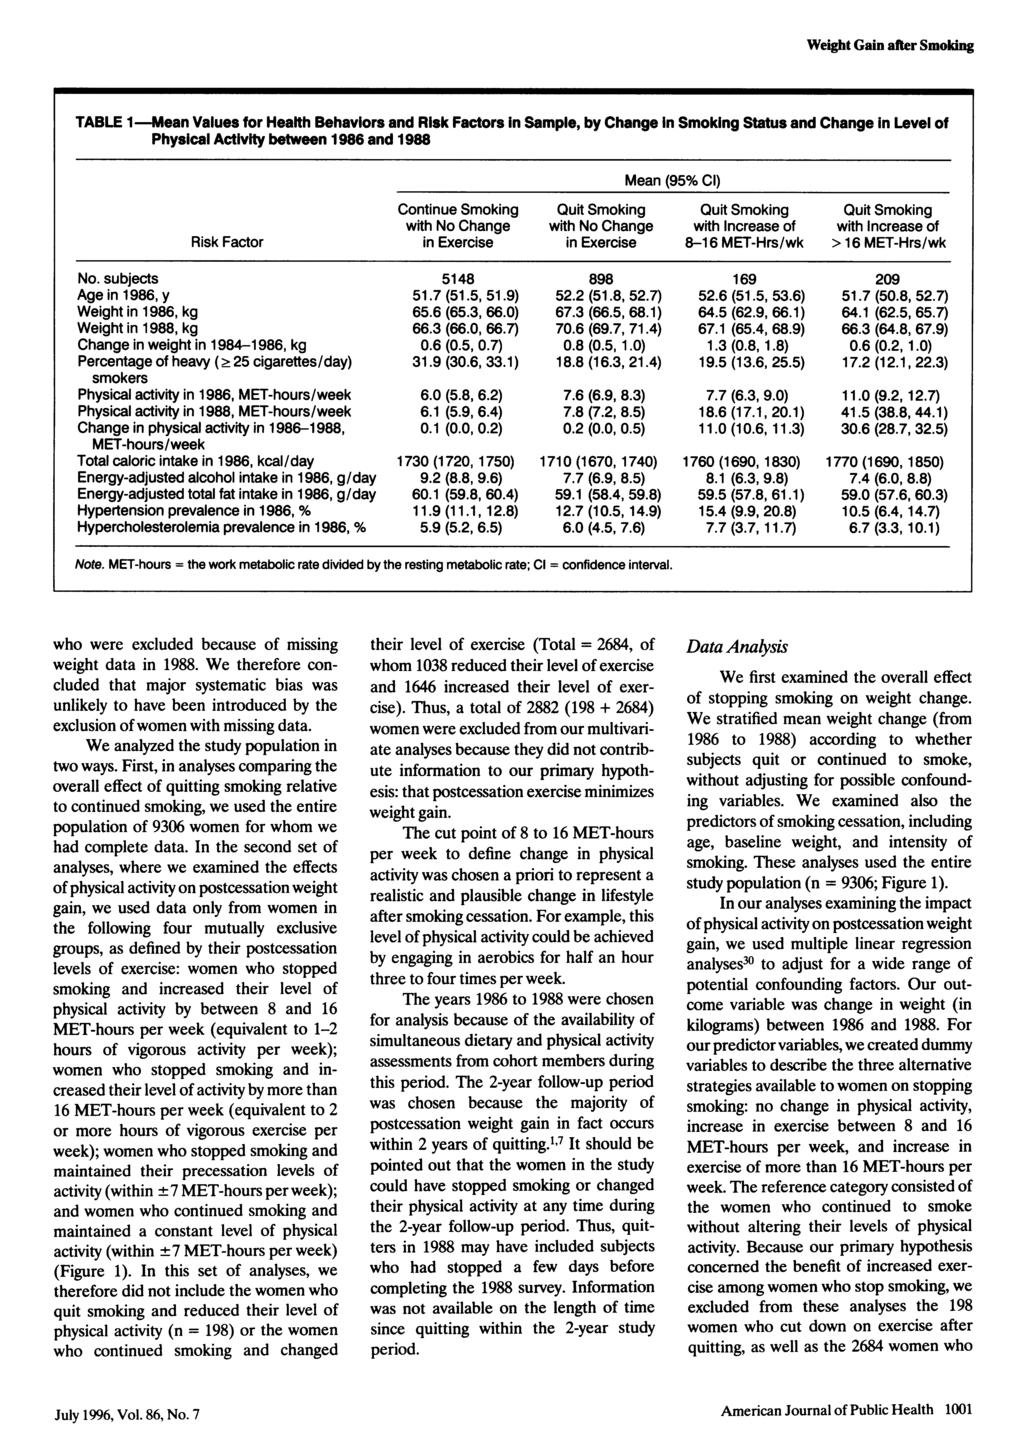 Weight Gain after Smoldng TABLE 1 Mean Values for Health Behaviors and Risk Factors in Sample, by Change In Smoking Status and Change in Level of Physical Activity between 1986 and 1988 Mean (95% Ci)